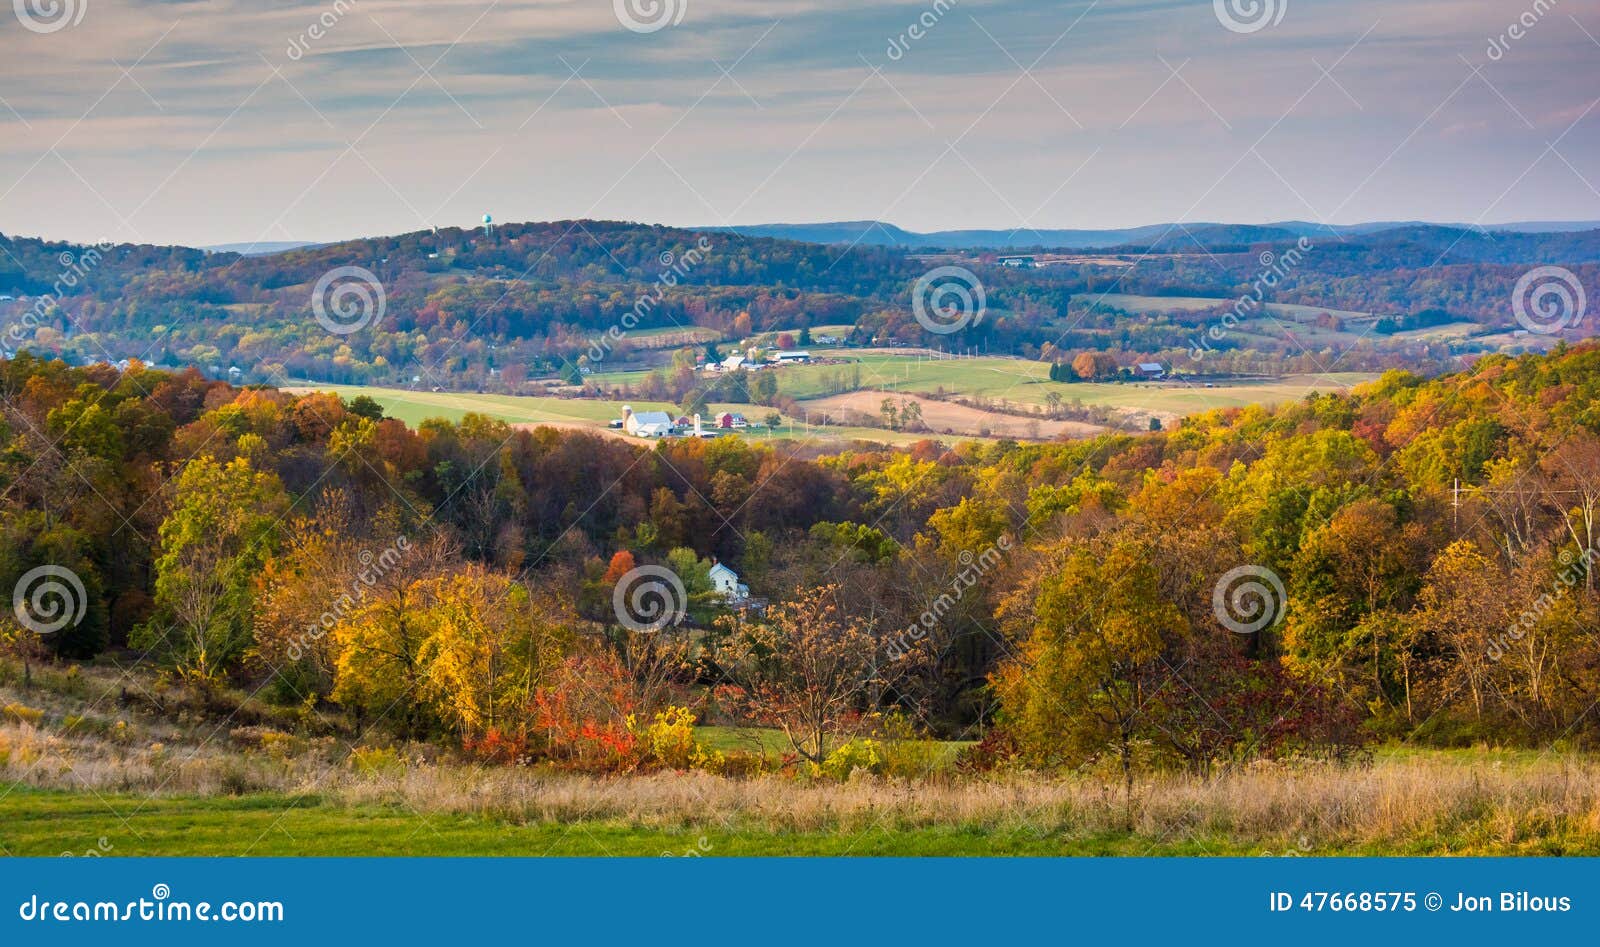 view of rolling hills in rural frederick county, maryland.